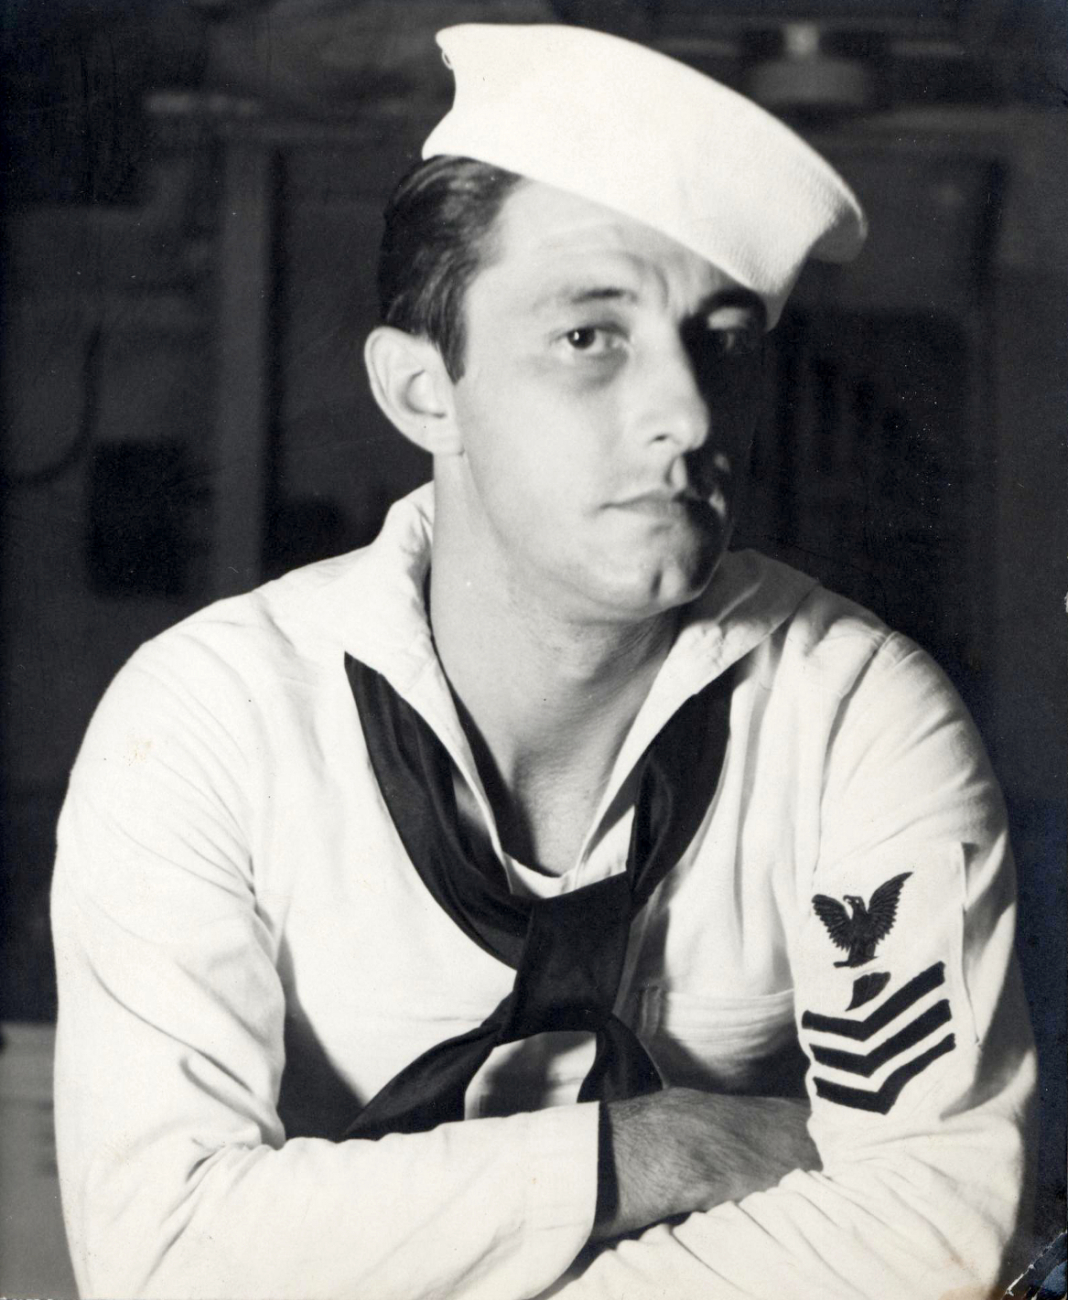 Unidentified sailor photographed by Photographers Mate Ira G